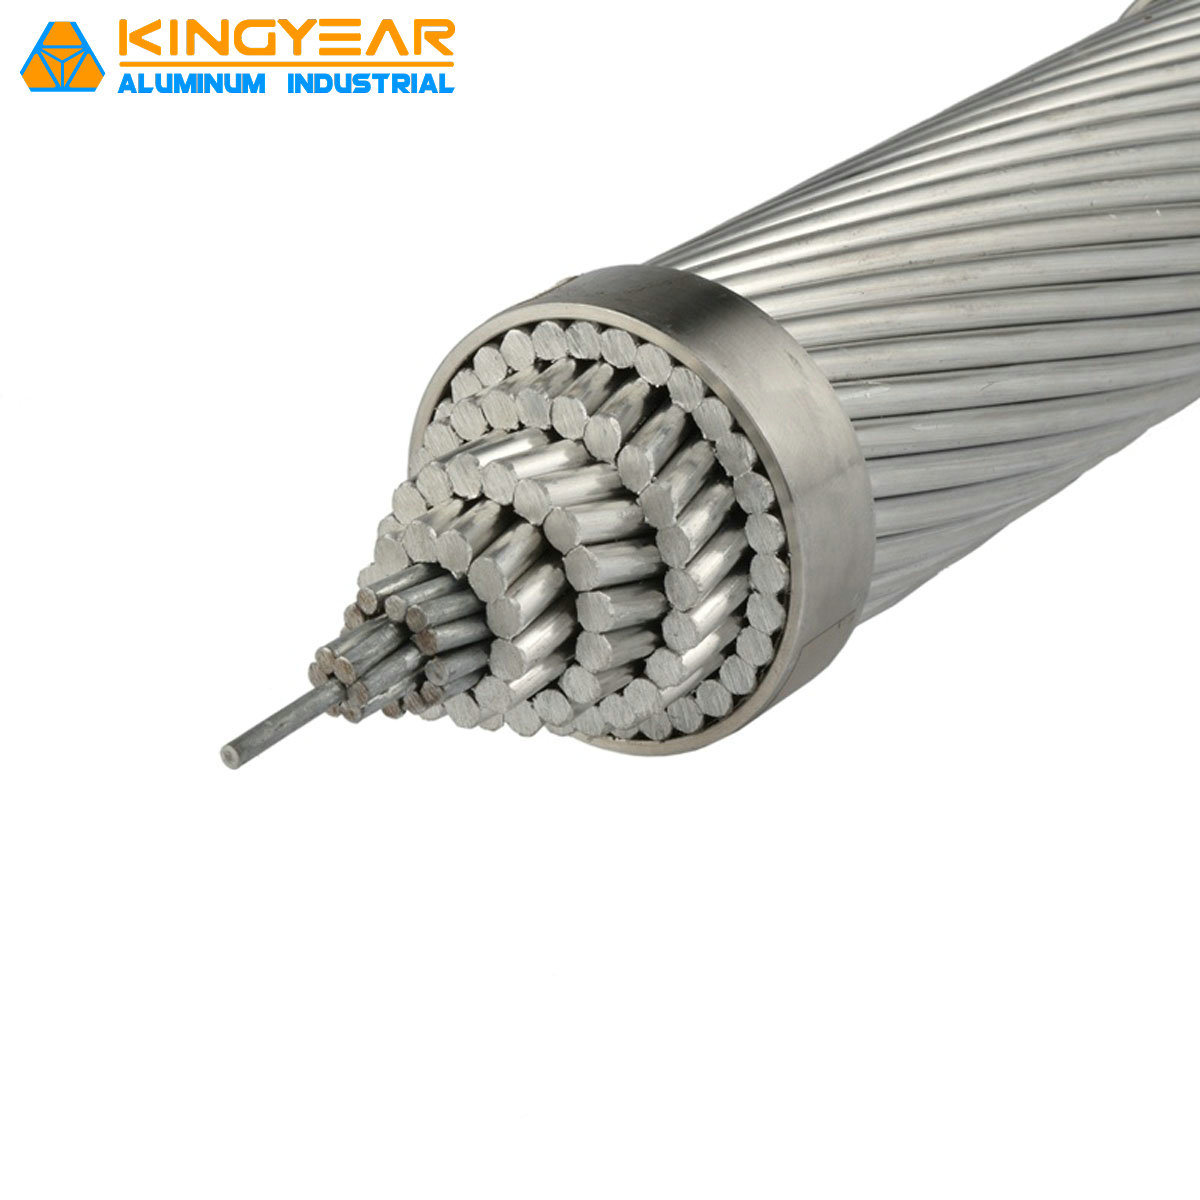 Steel Reinforced Stranded Bare Conductor Used as Overhead Transmission Lines